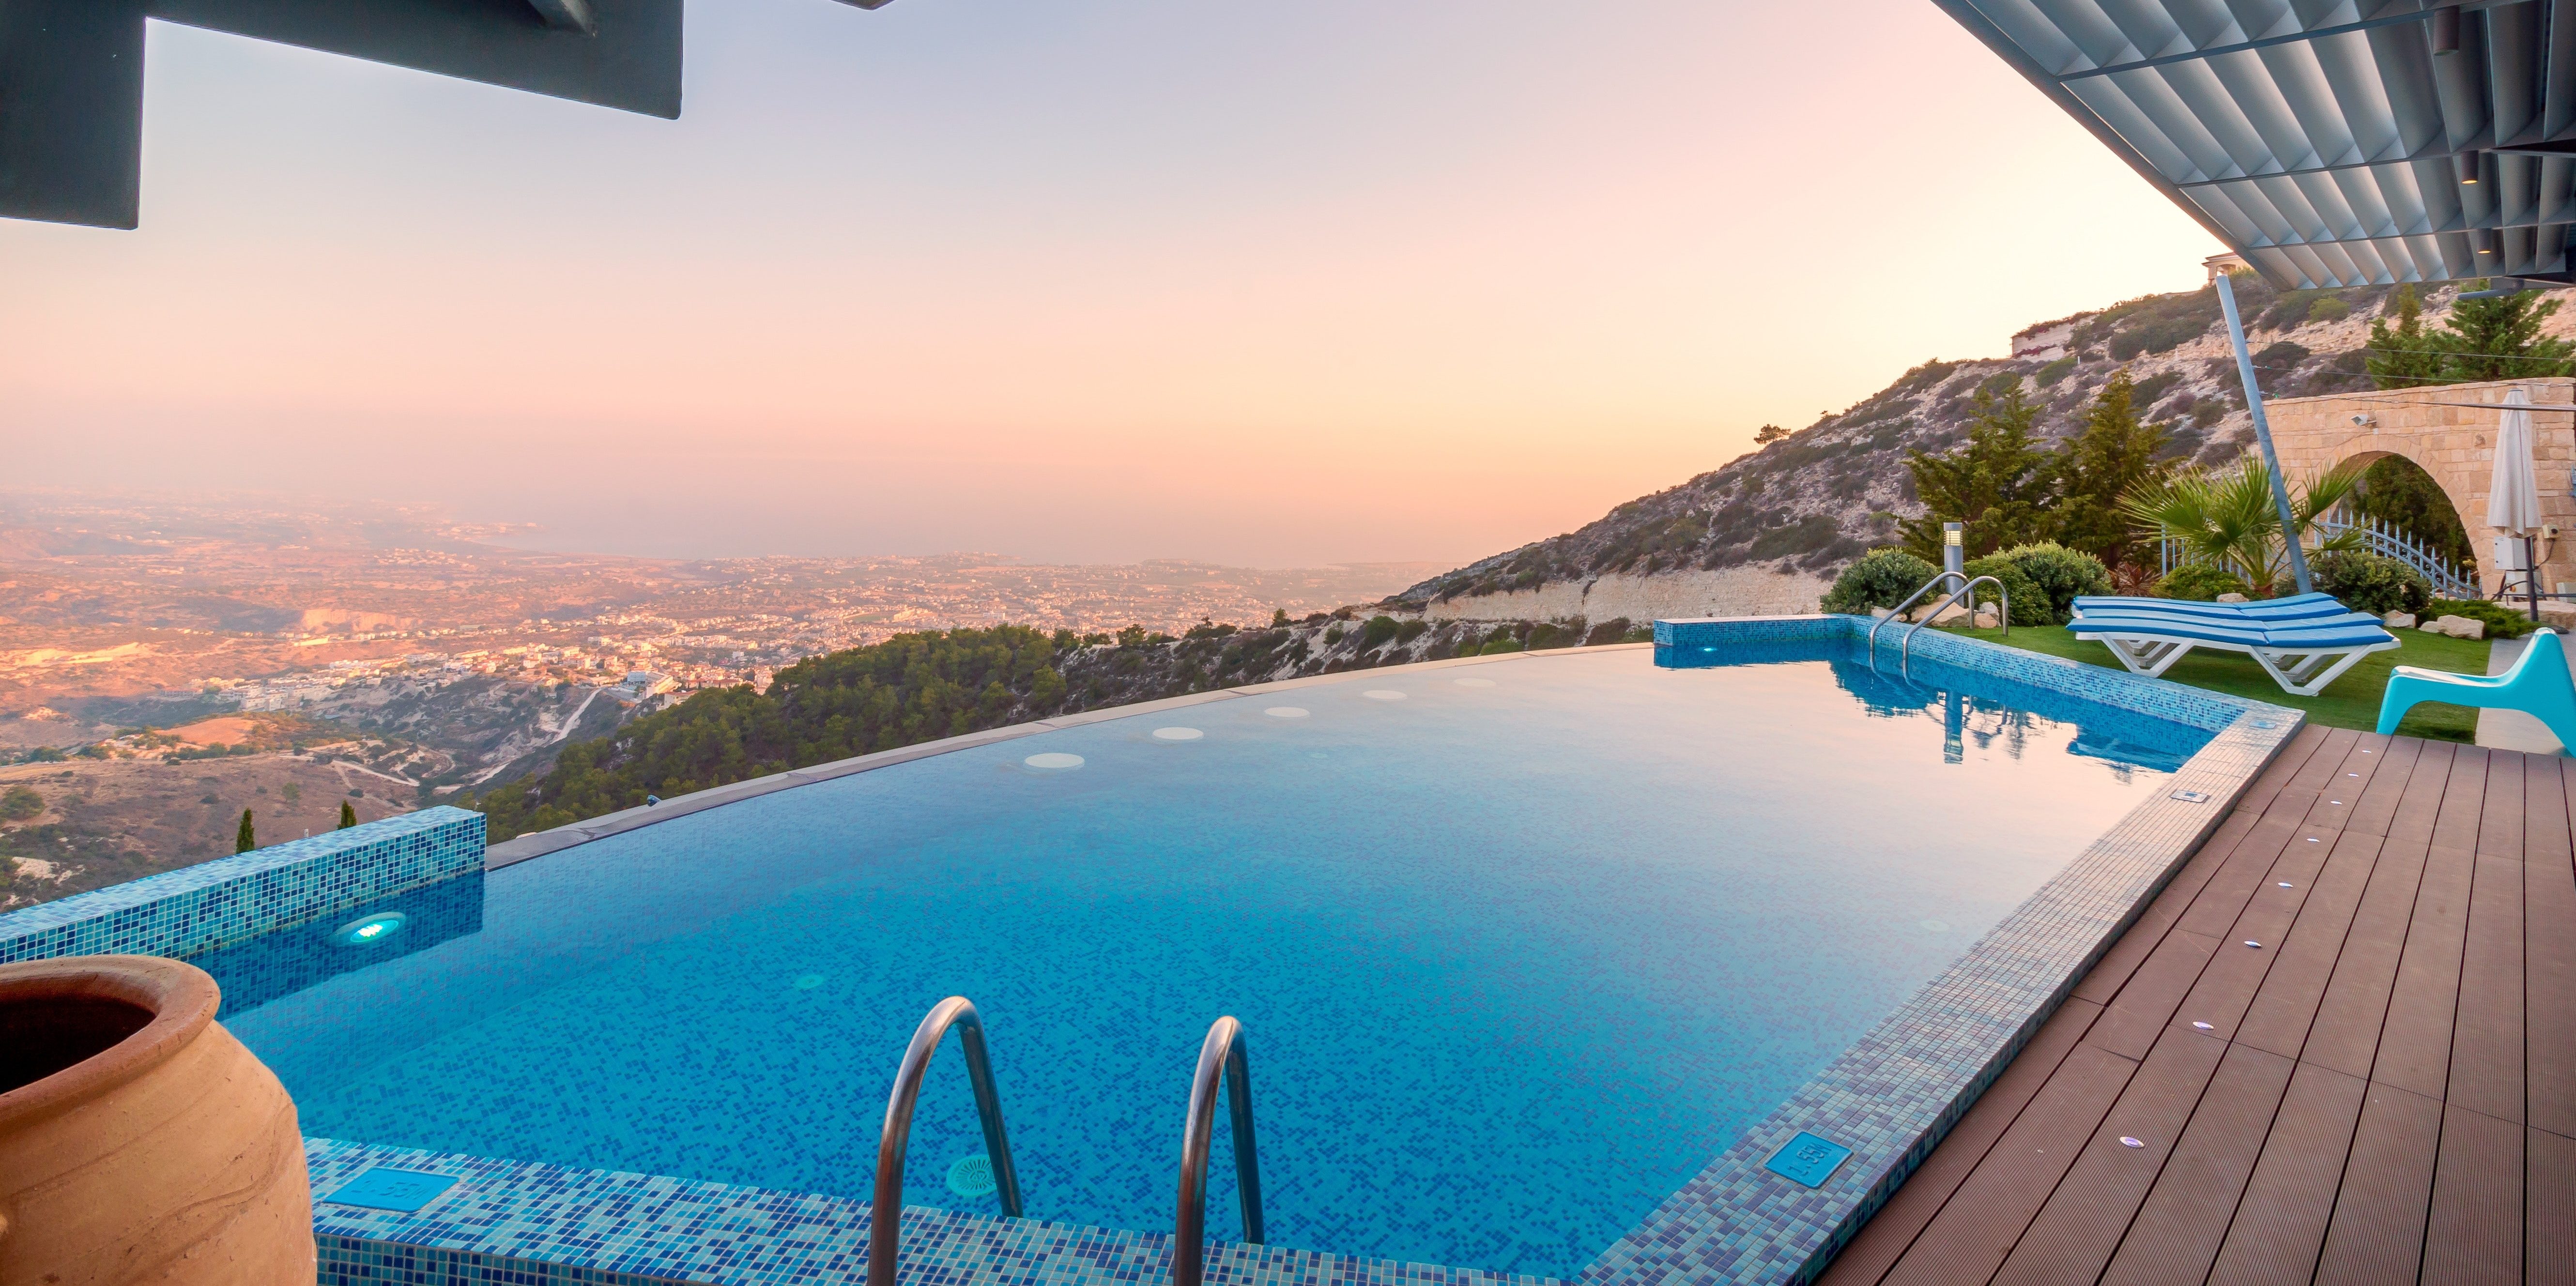 A scenic view from an infinity pool on a mountain property